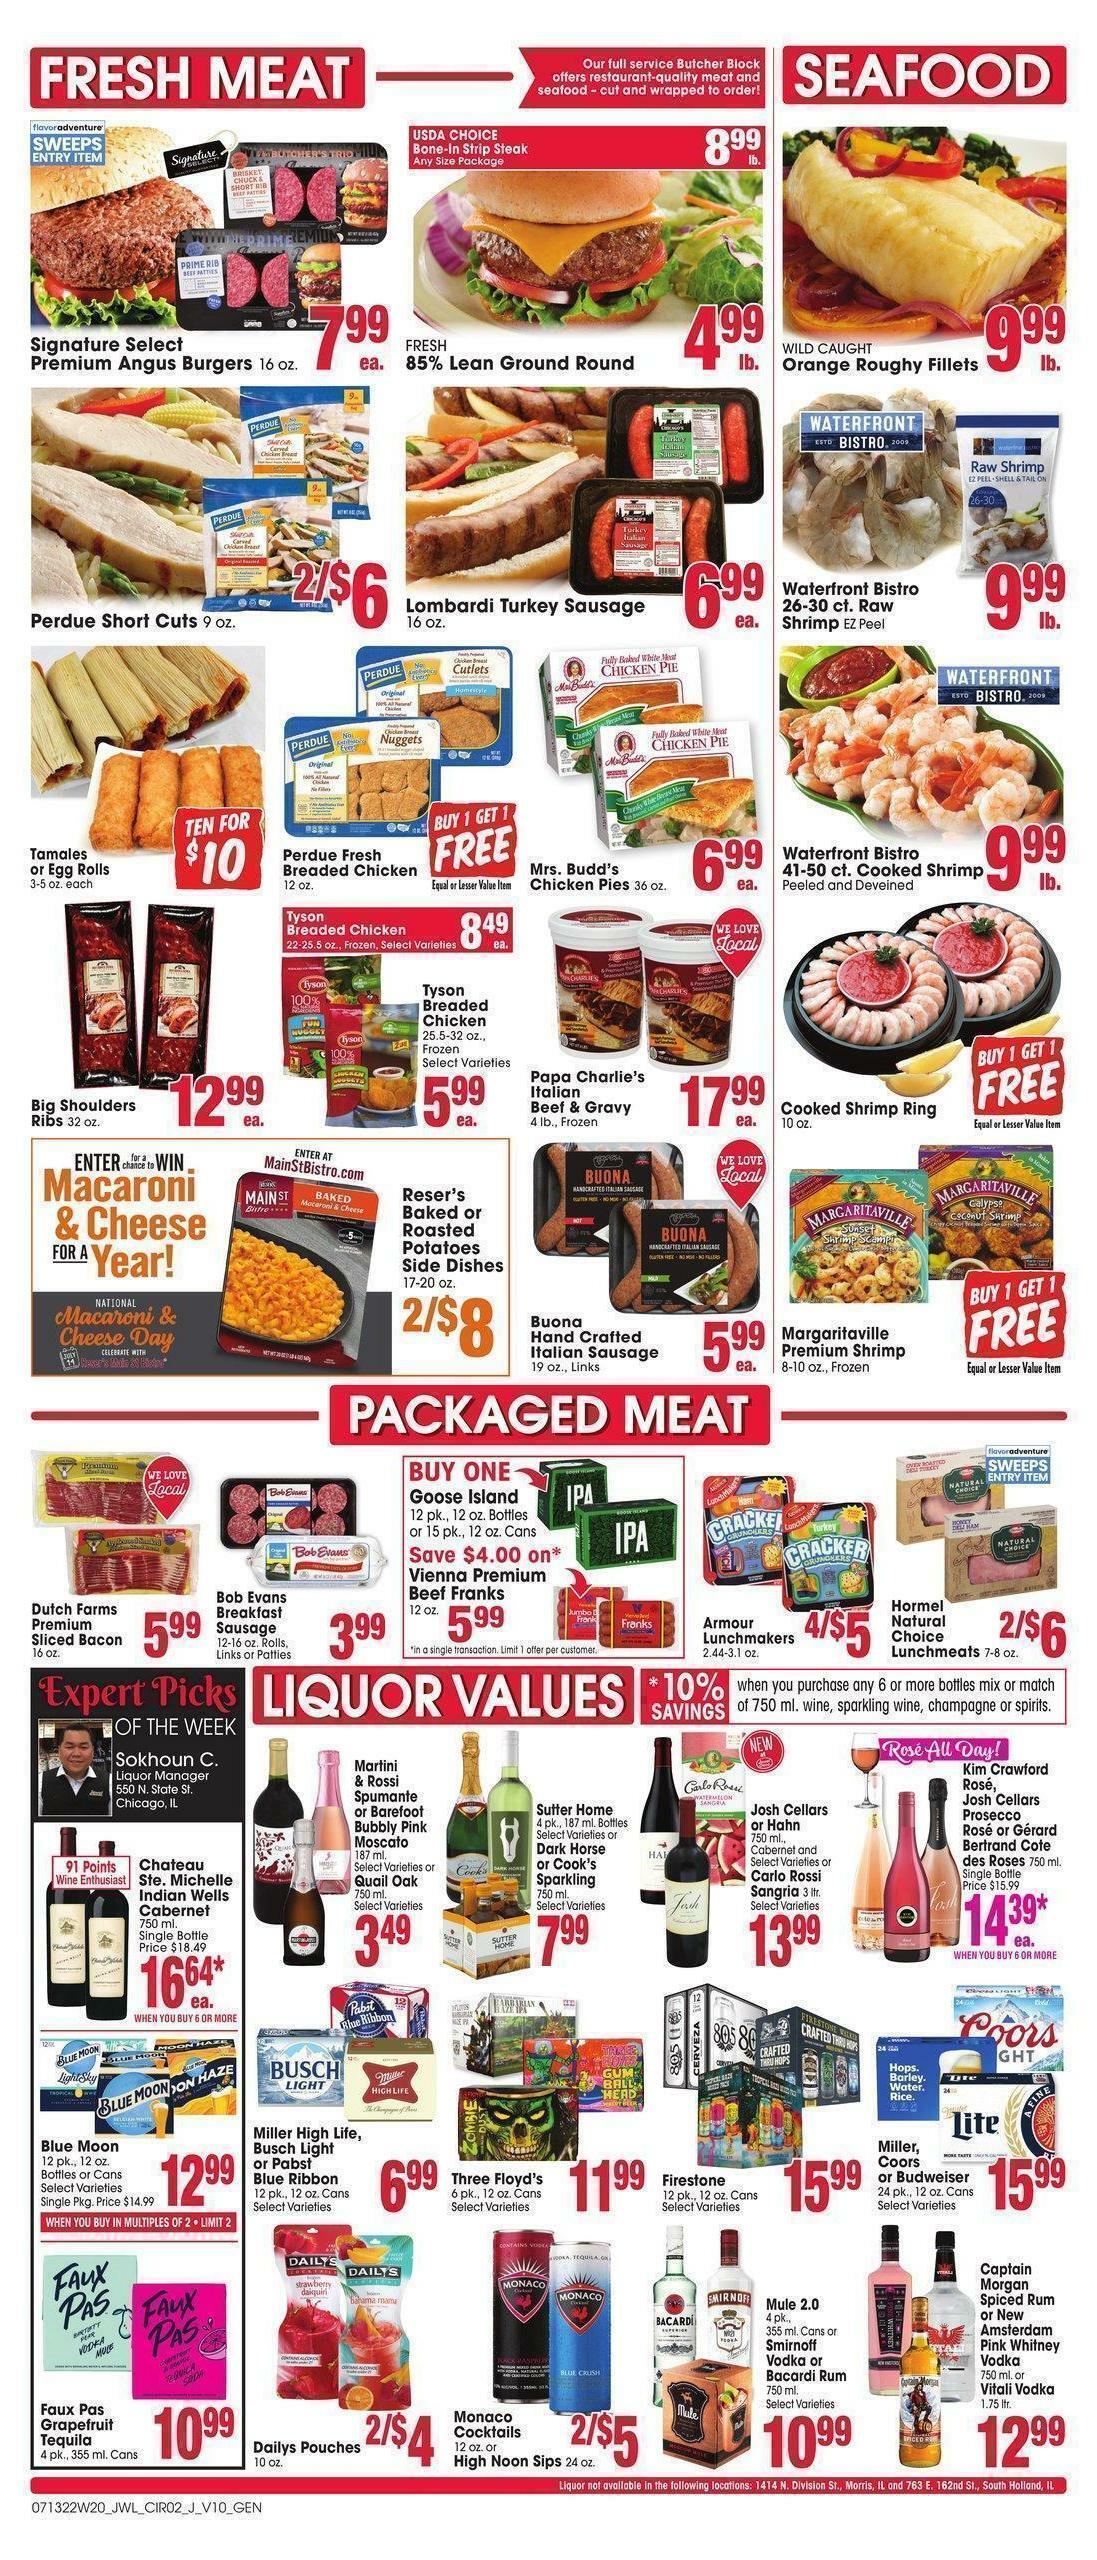 Jewel Osco Weekly Ad from July 13